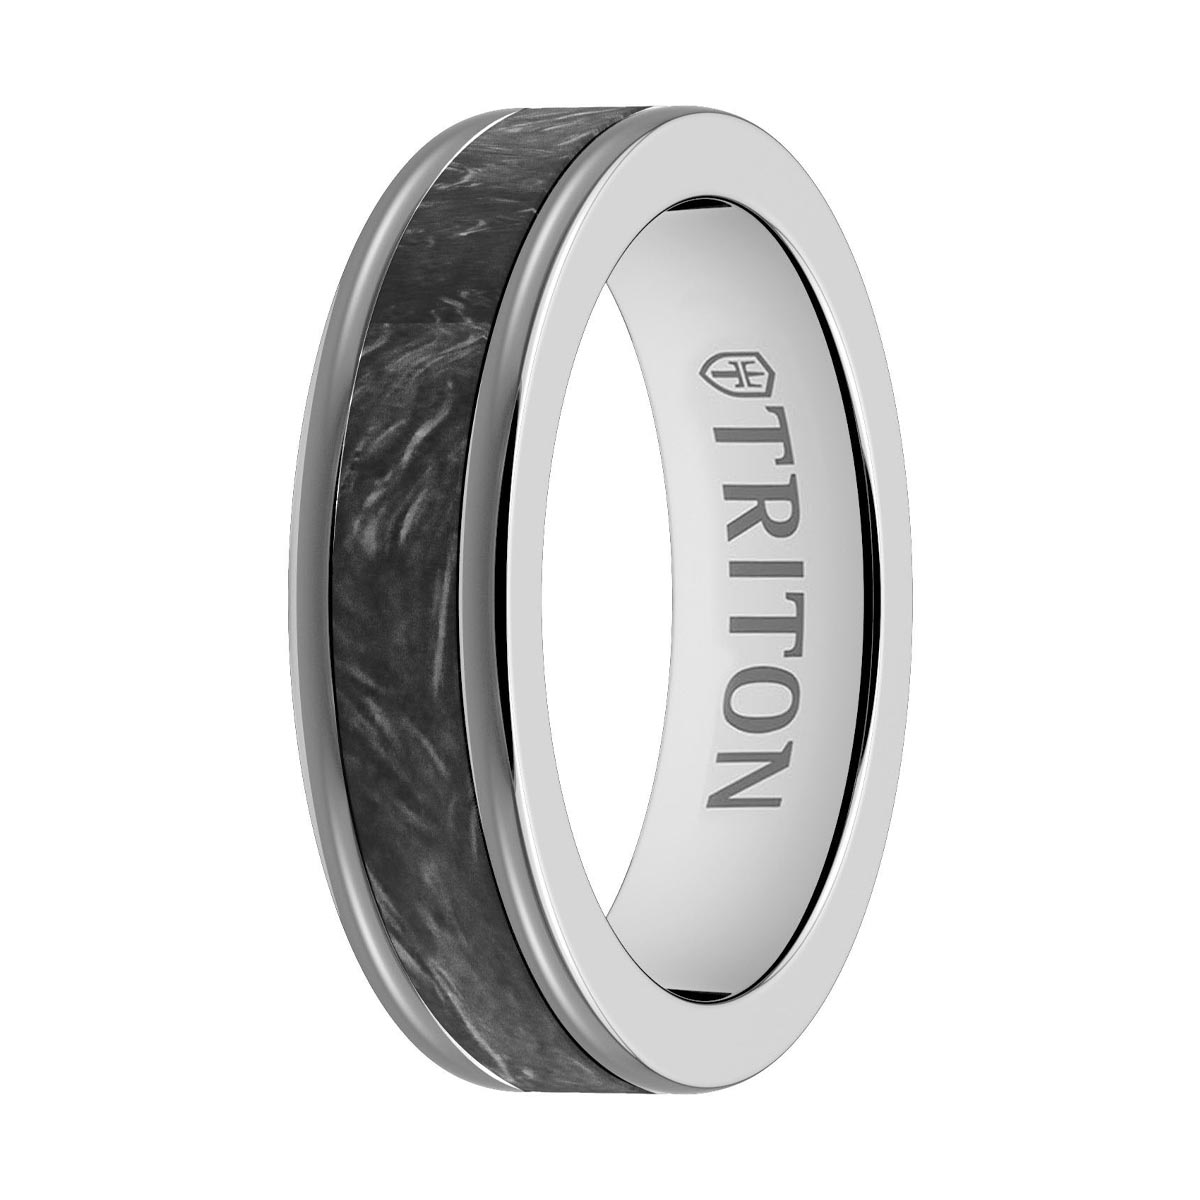 Triton Mens Wedding Band in Gray Tungsten and Carbon Fiber (6mm)